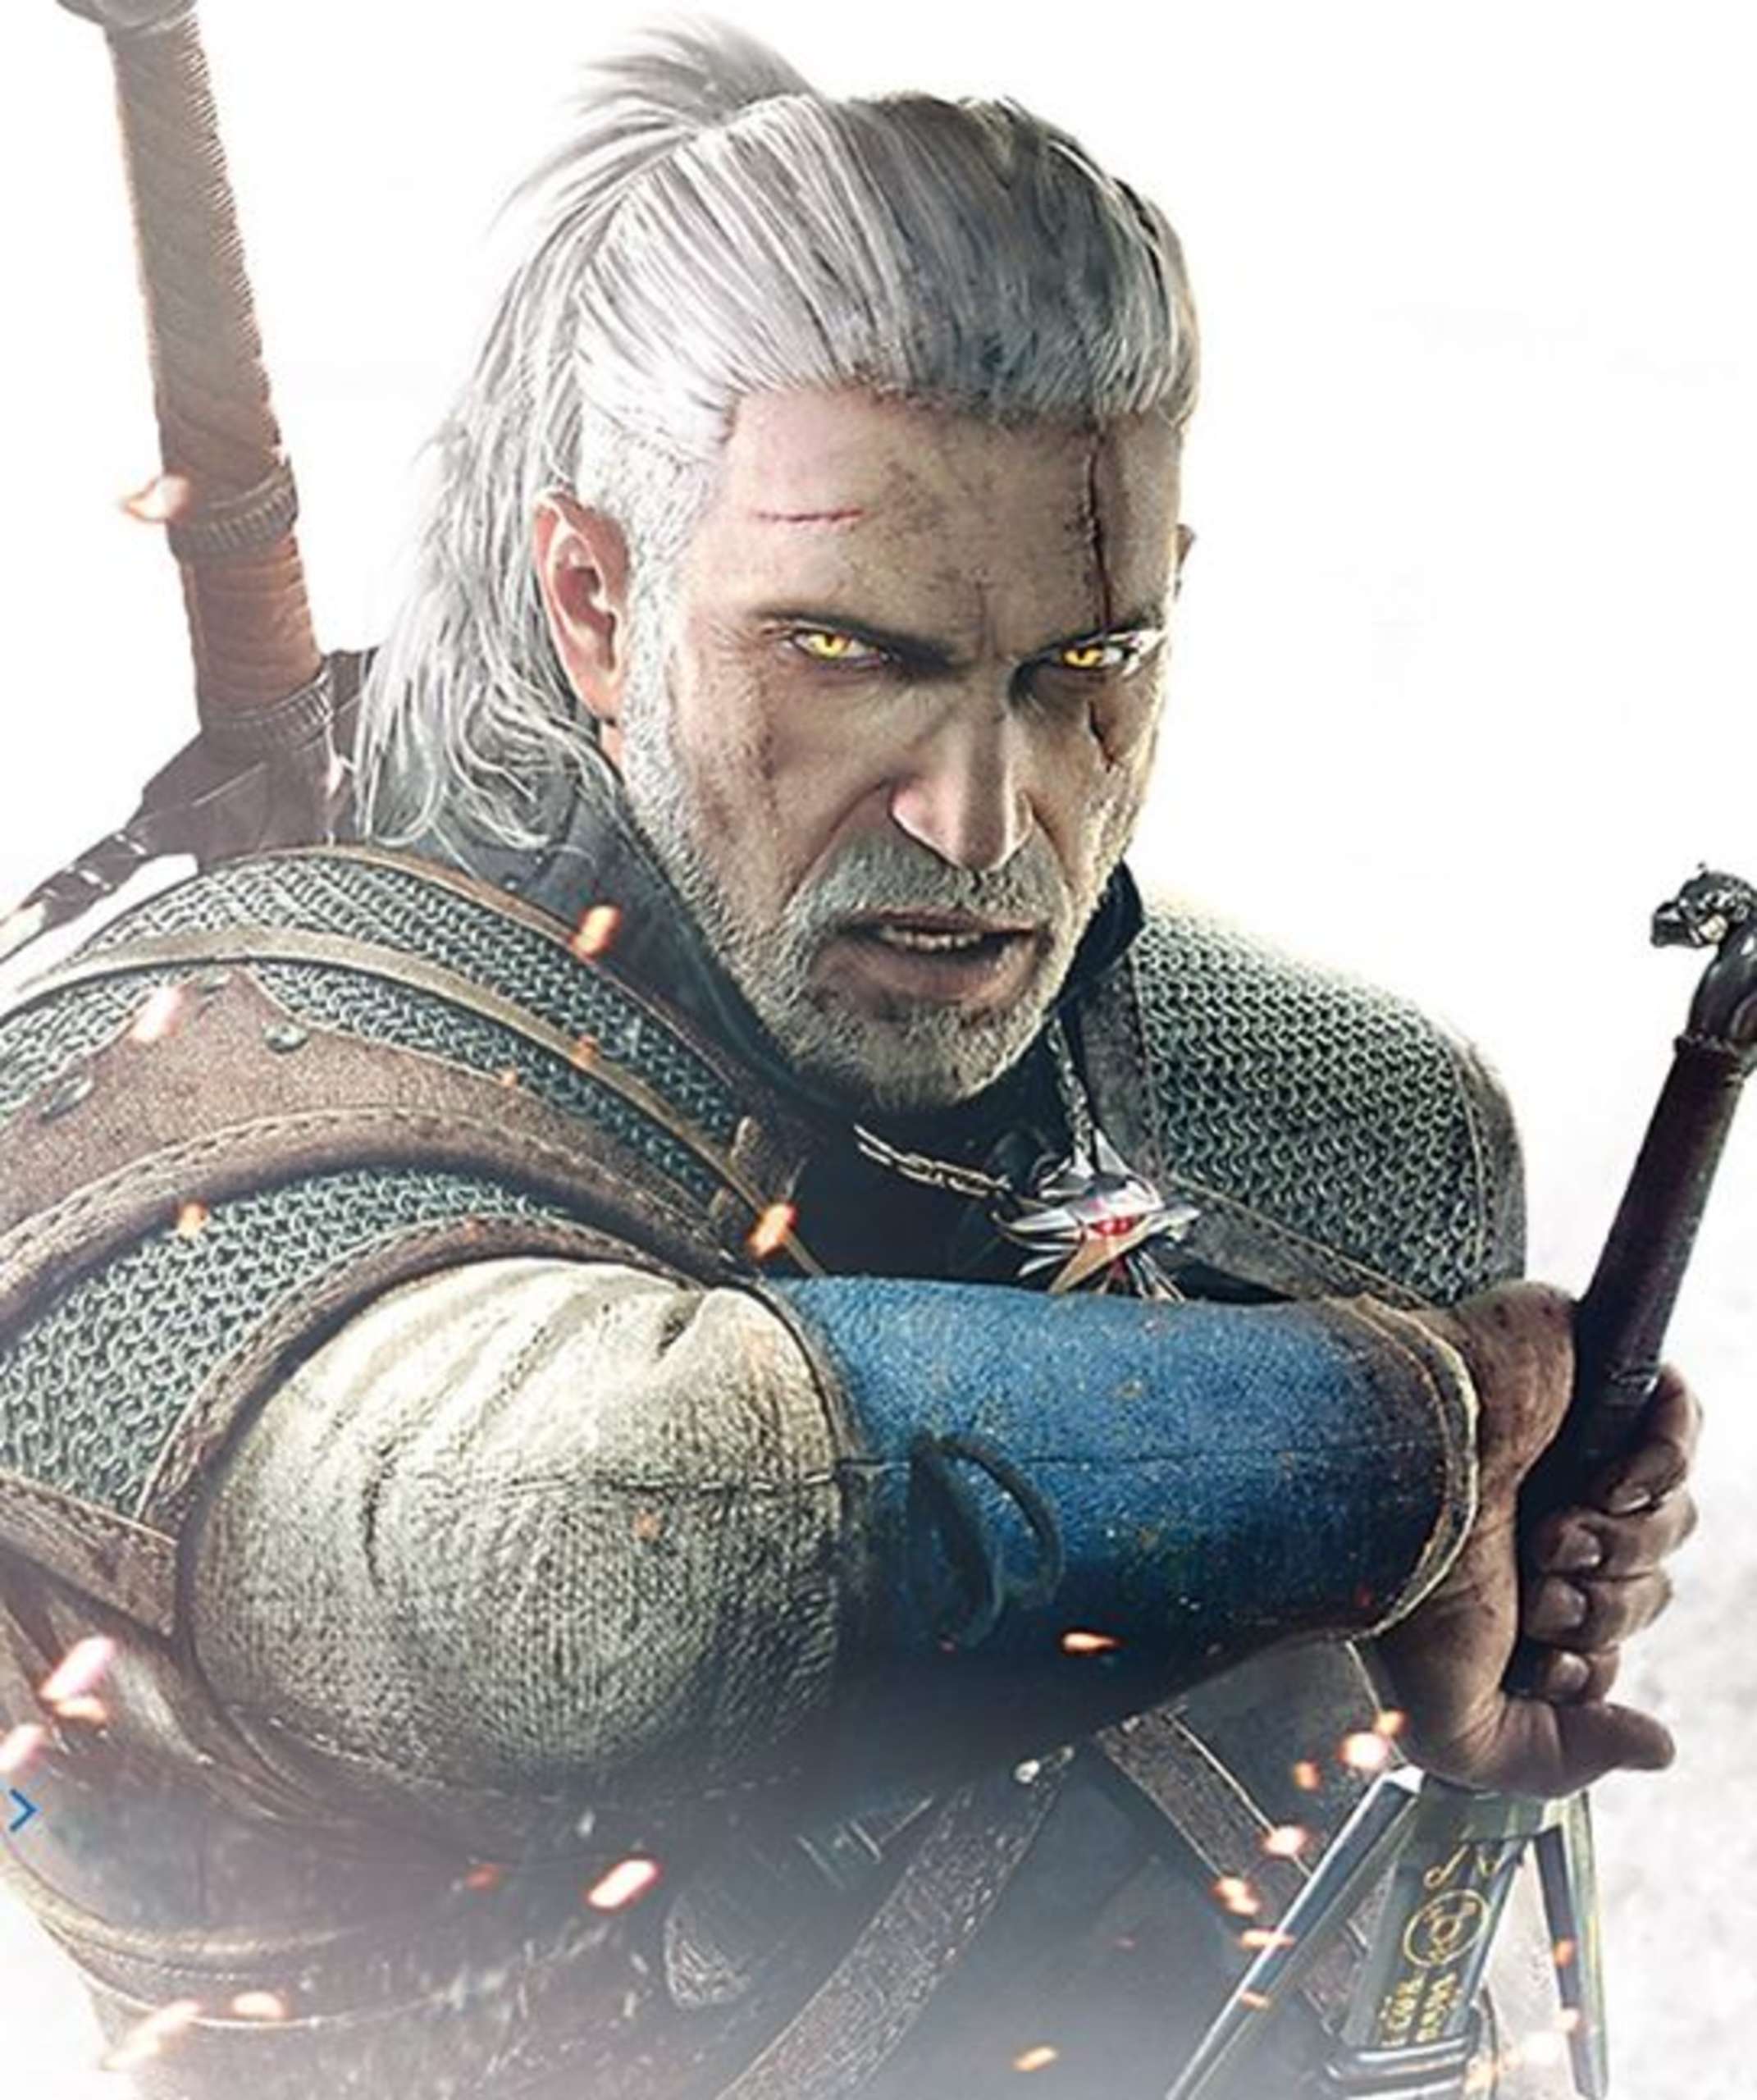 CD Projekt Red Has Announced That The Witcher 3 Wild Hunt Will Receive A New Next-Gen Edition For PS5 And Xbox